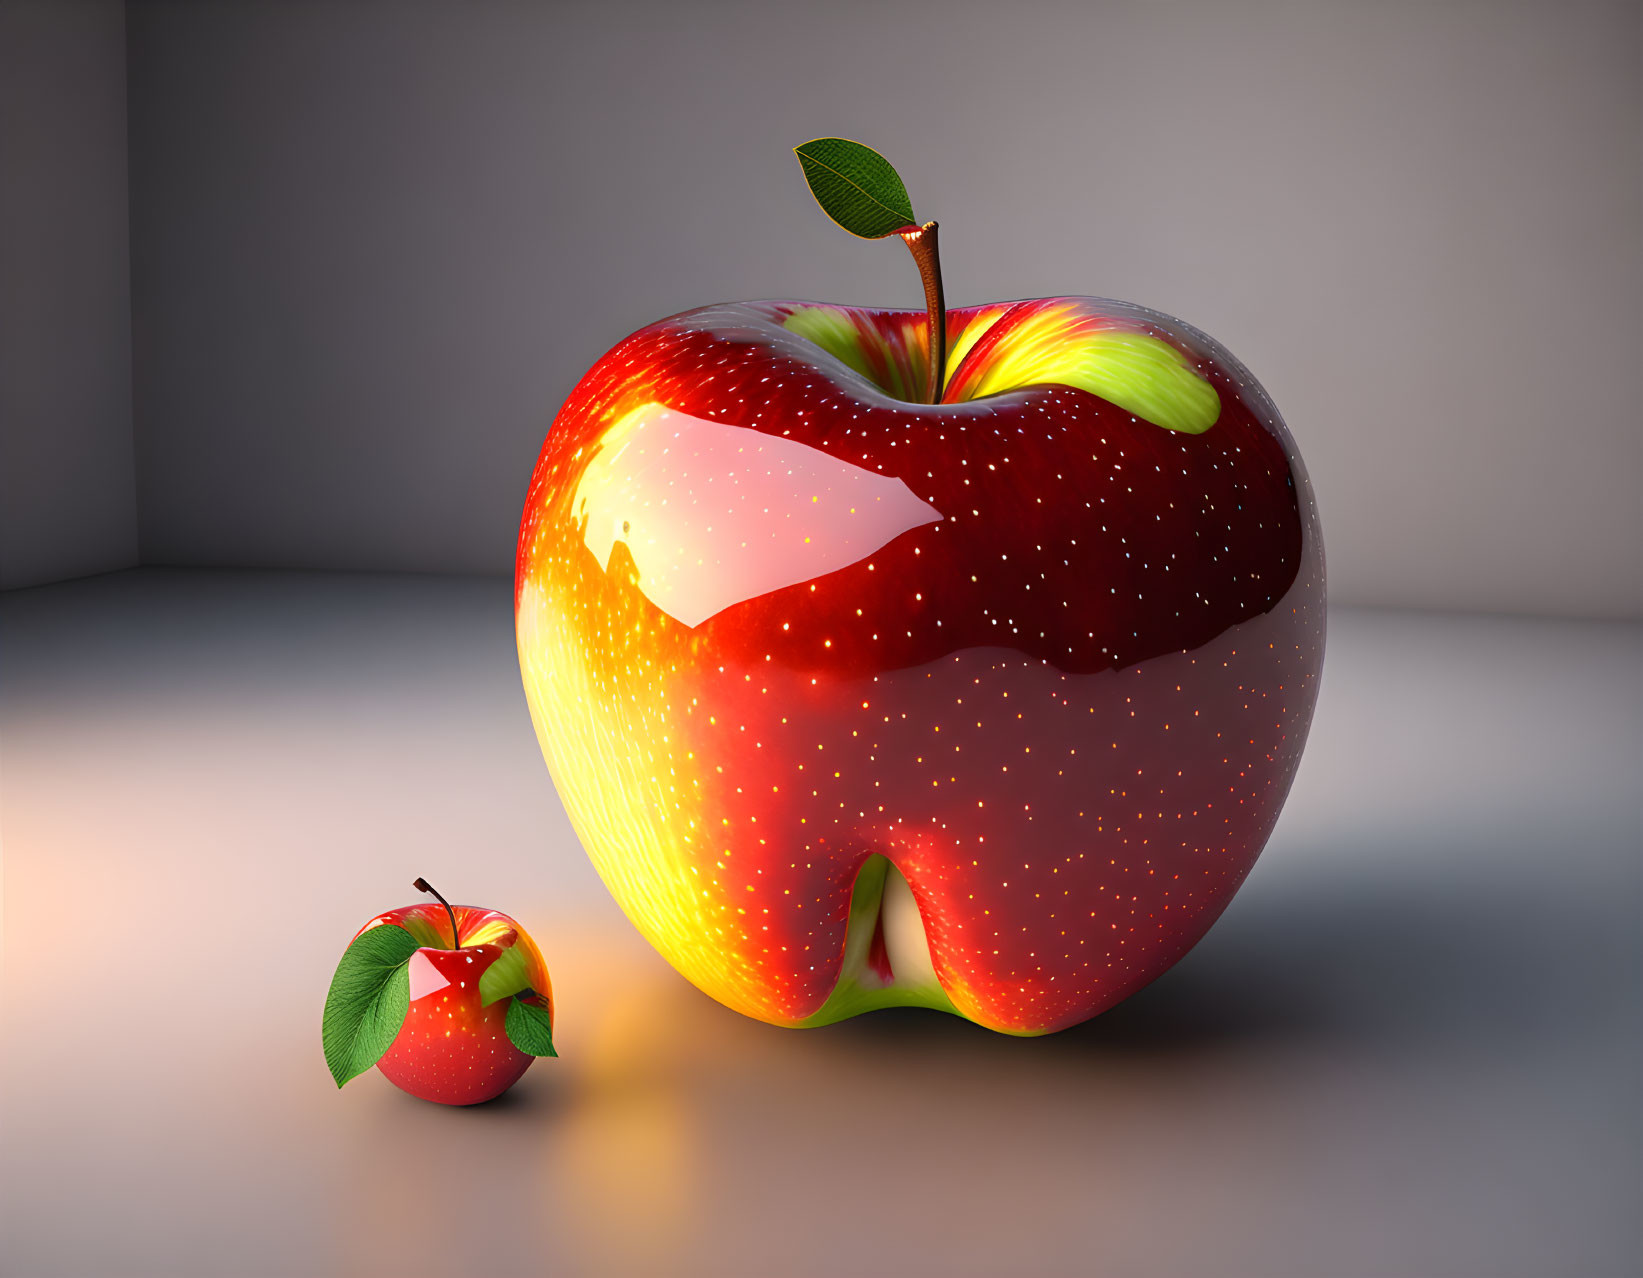 Two Red Apples with Bite Marks on Reflective Surface